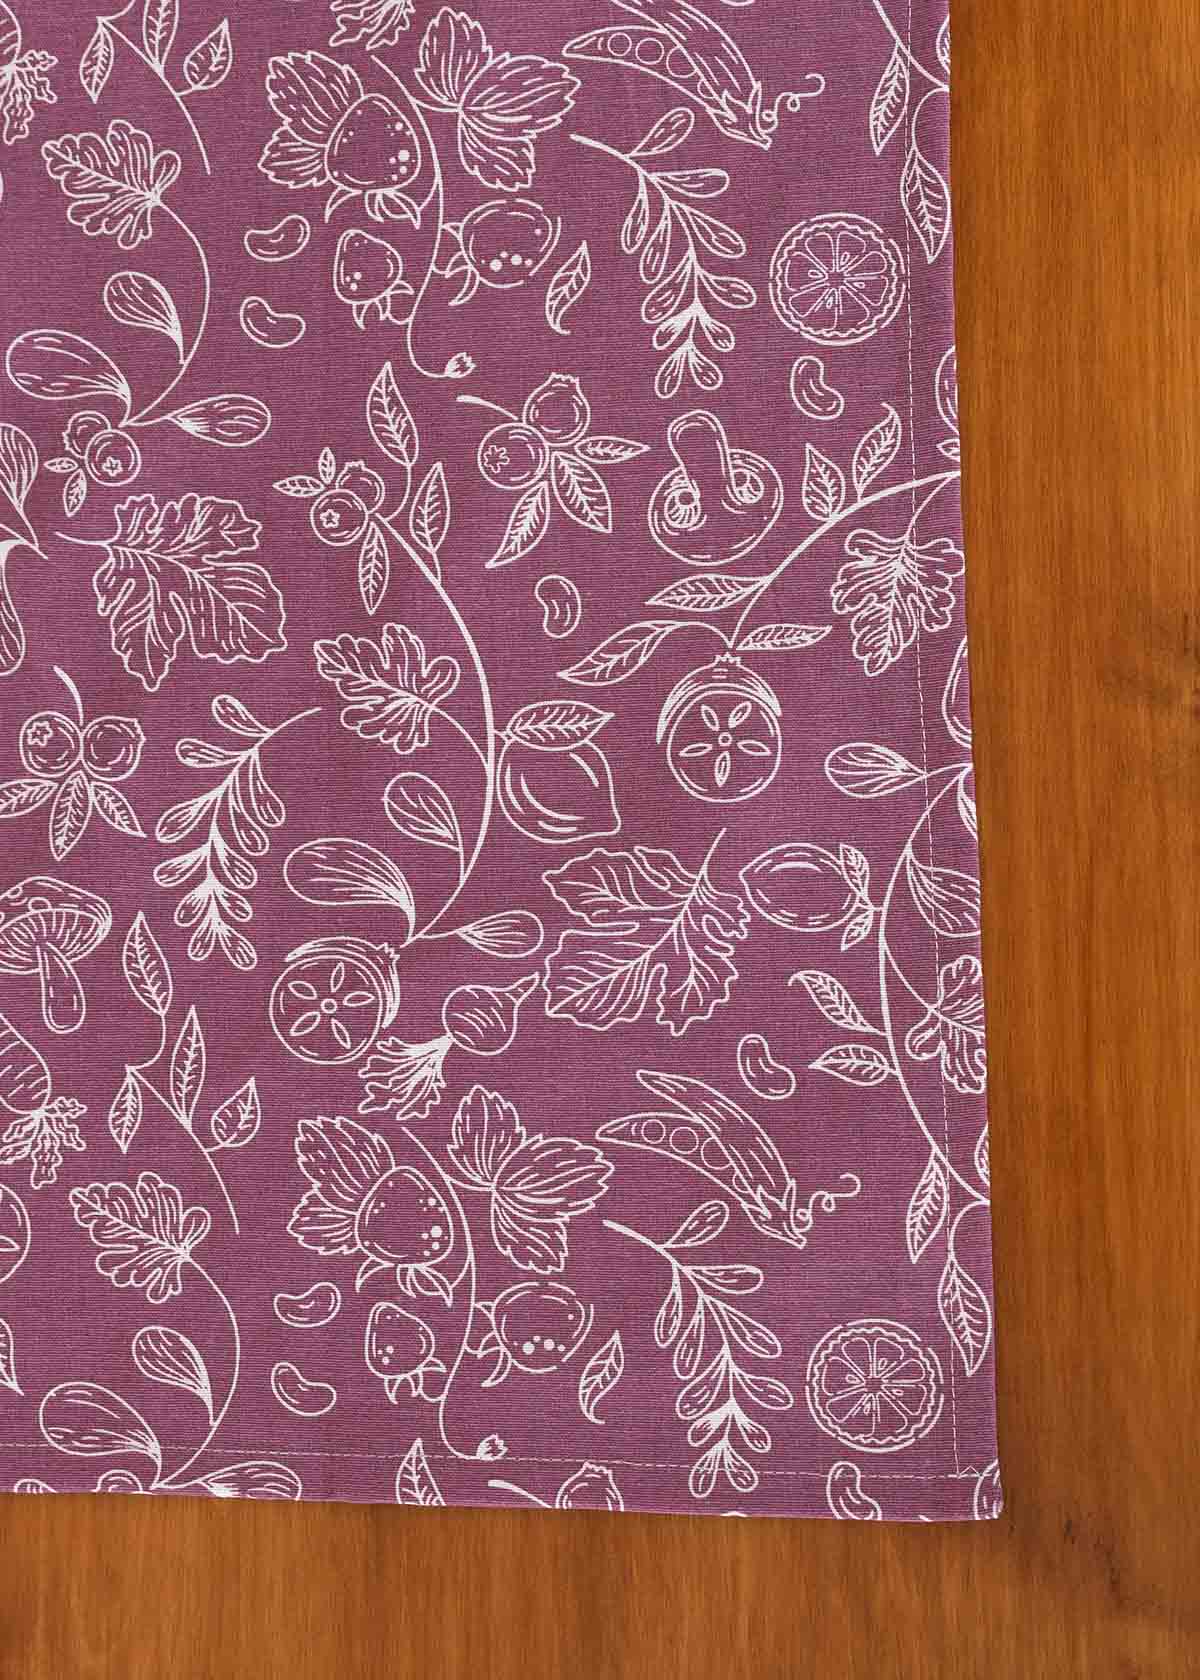 Kitchen Garden 100% cotton floral table cloth for 4 seater or 6 seater dining - Violet